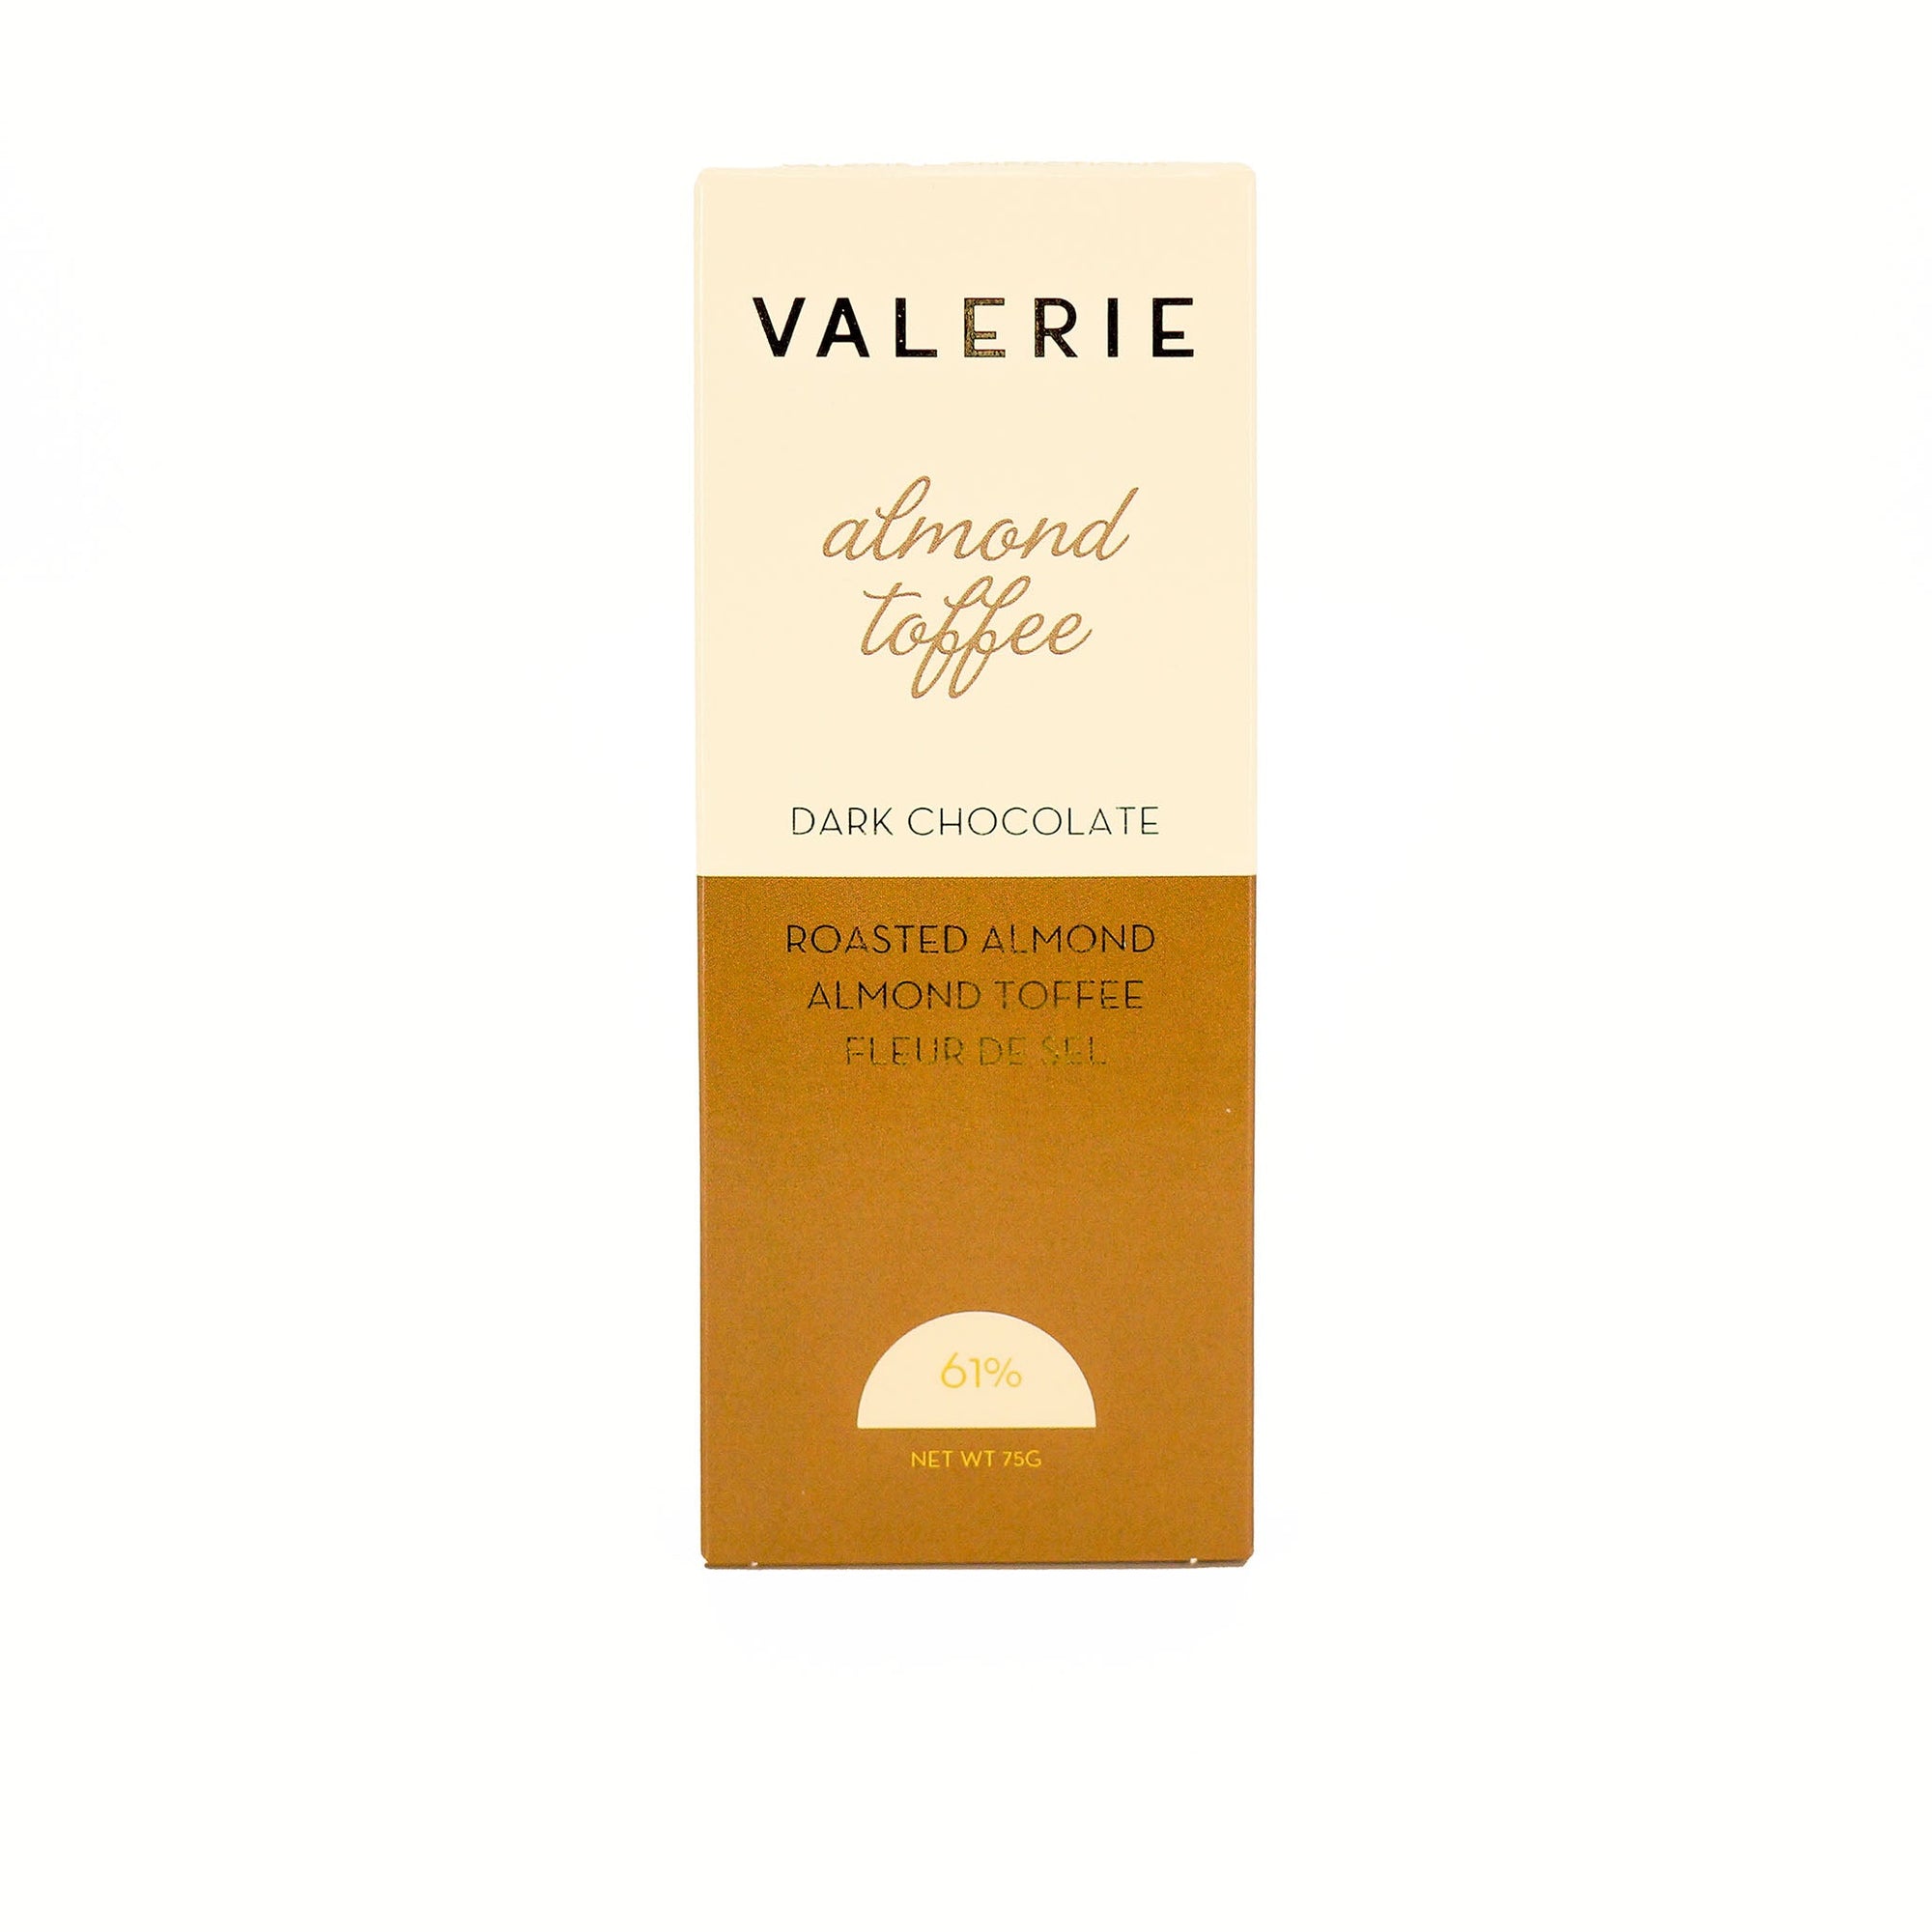 Valerie's Almond Toffee dark chocolate bar, containing roasted almond, almond toffee, and fleur de sel, with a cocoa content of 61% and weighing 75 grams.